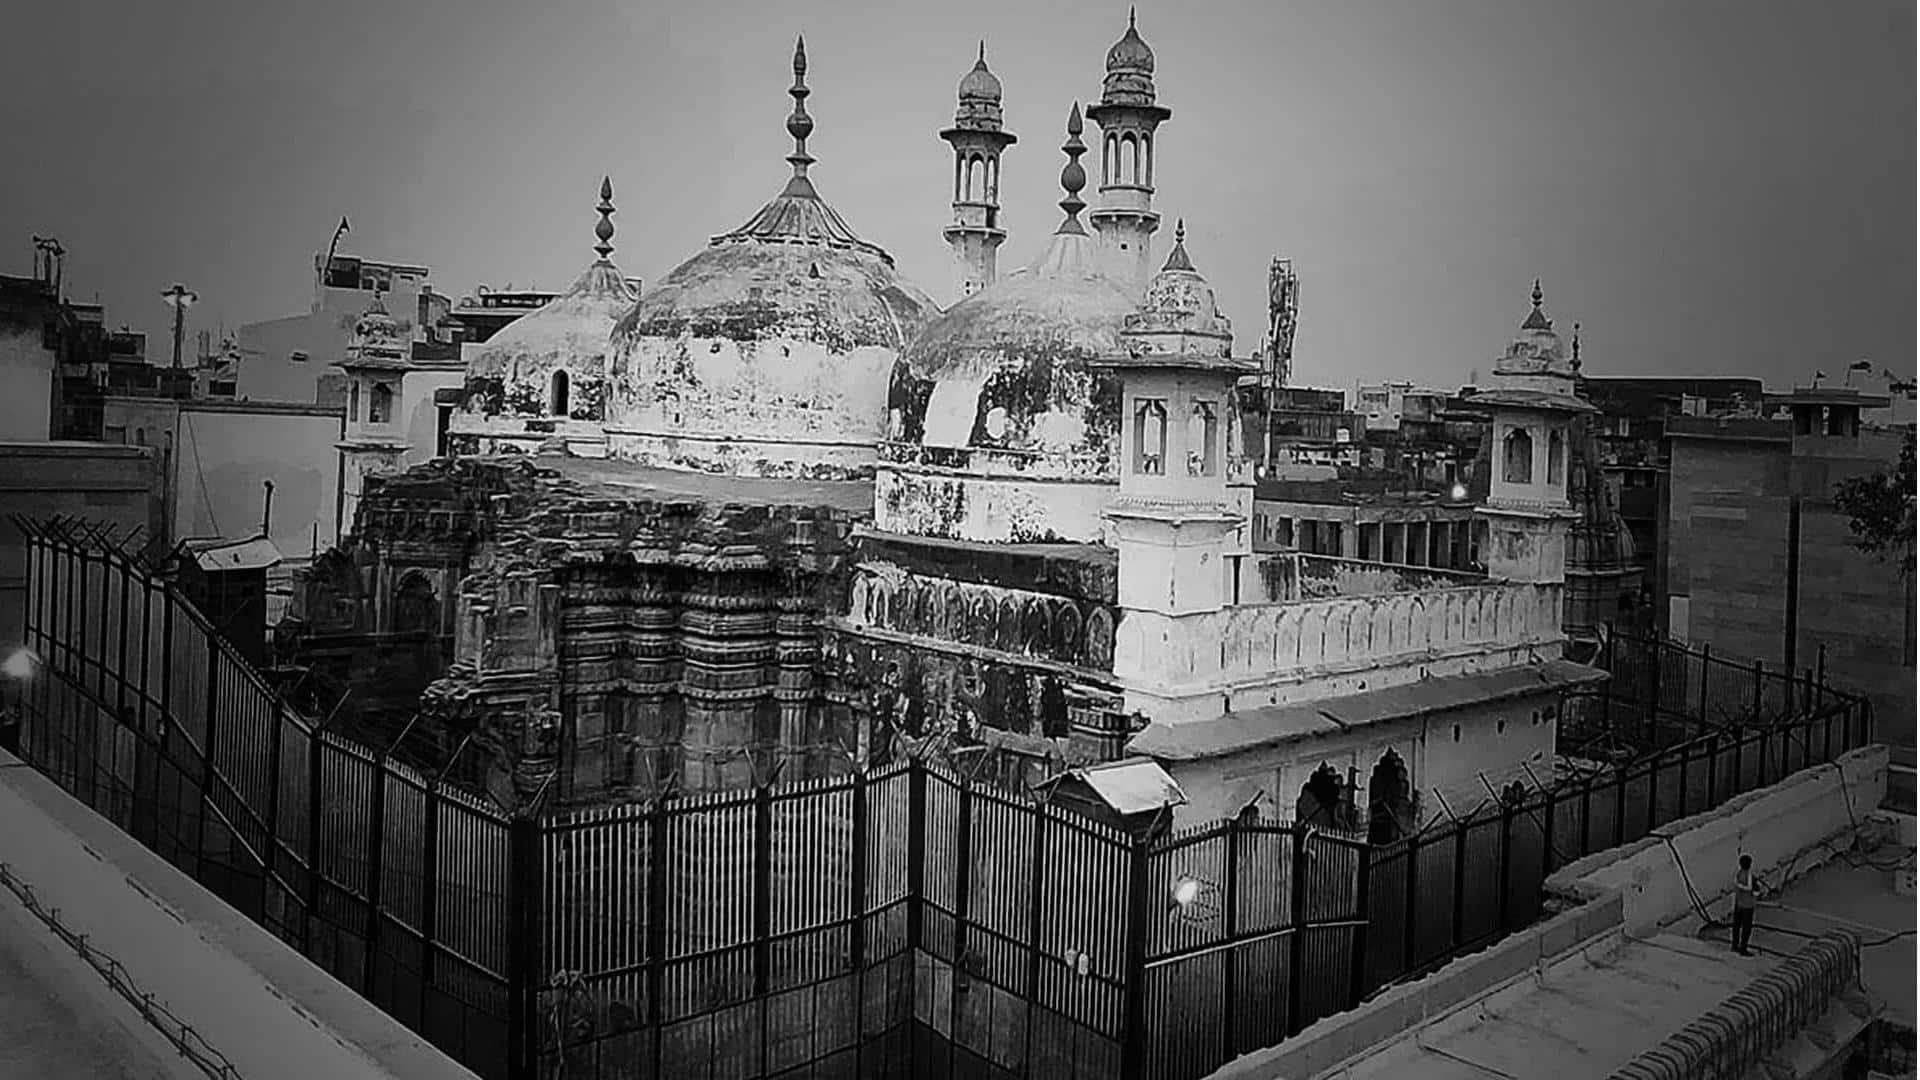 Gyanvapi Mosque: Findings of 'Hindu temple' emerge in ASI report